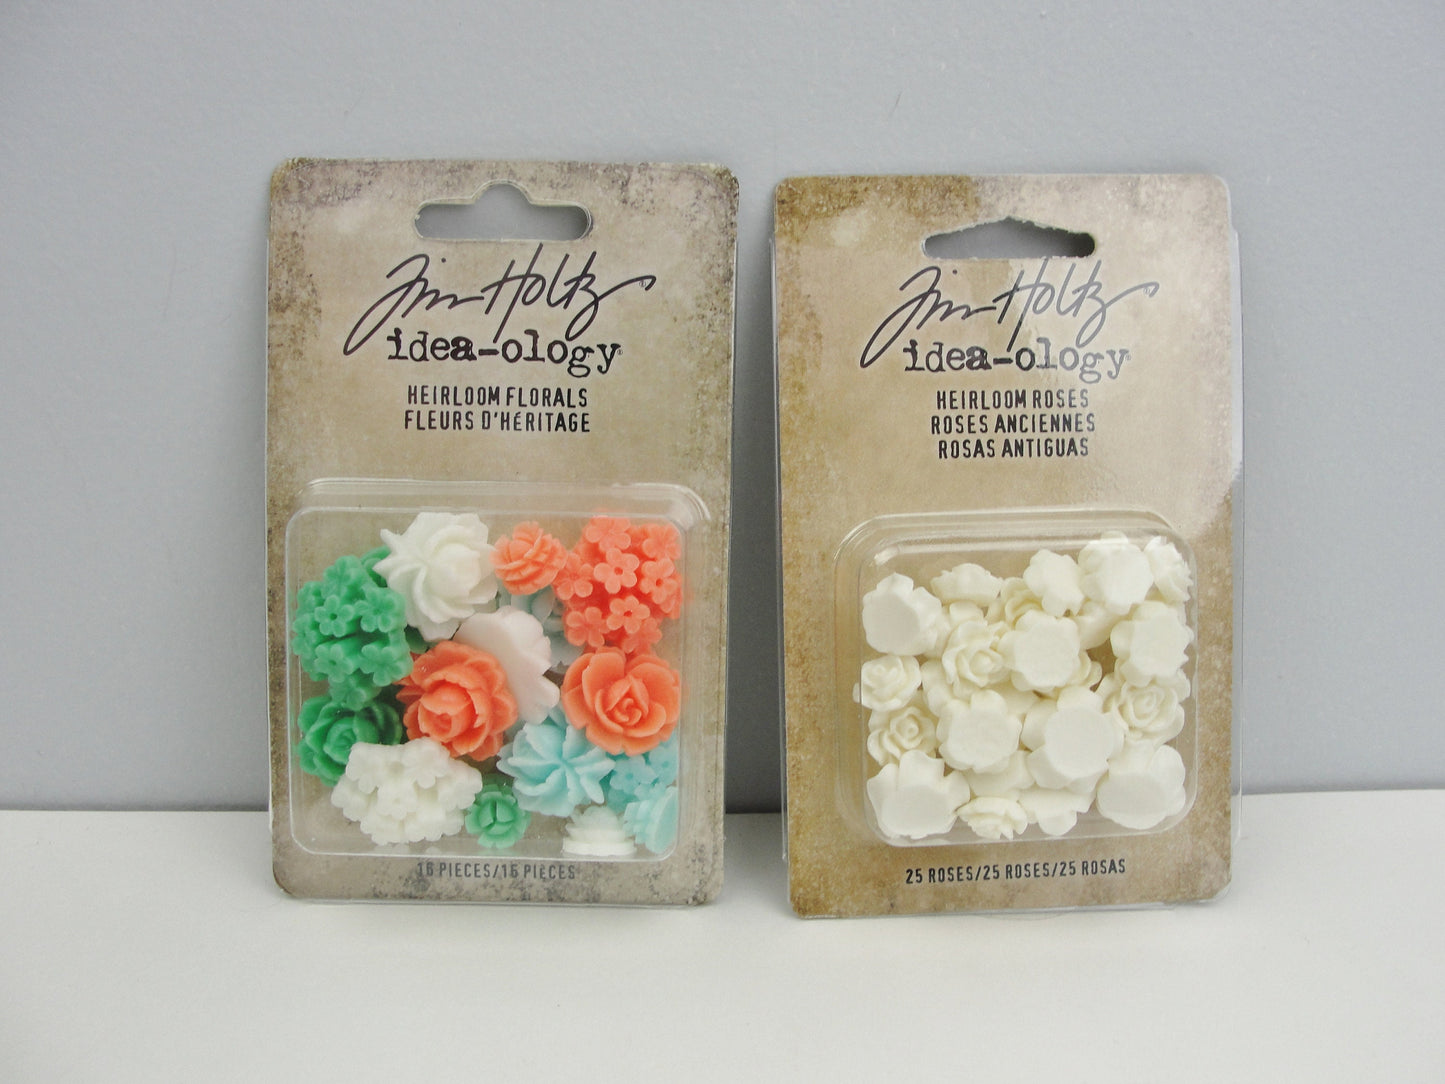 Tim Holtz Idea-ology heirloom roses or florals TH93210 TH94040